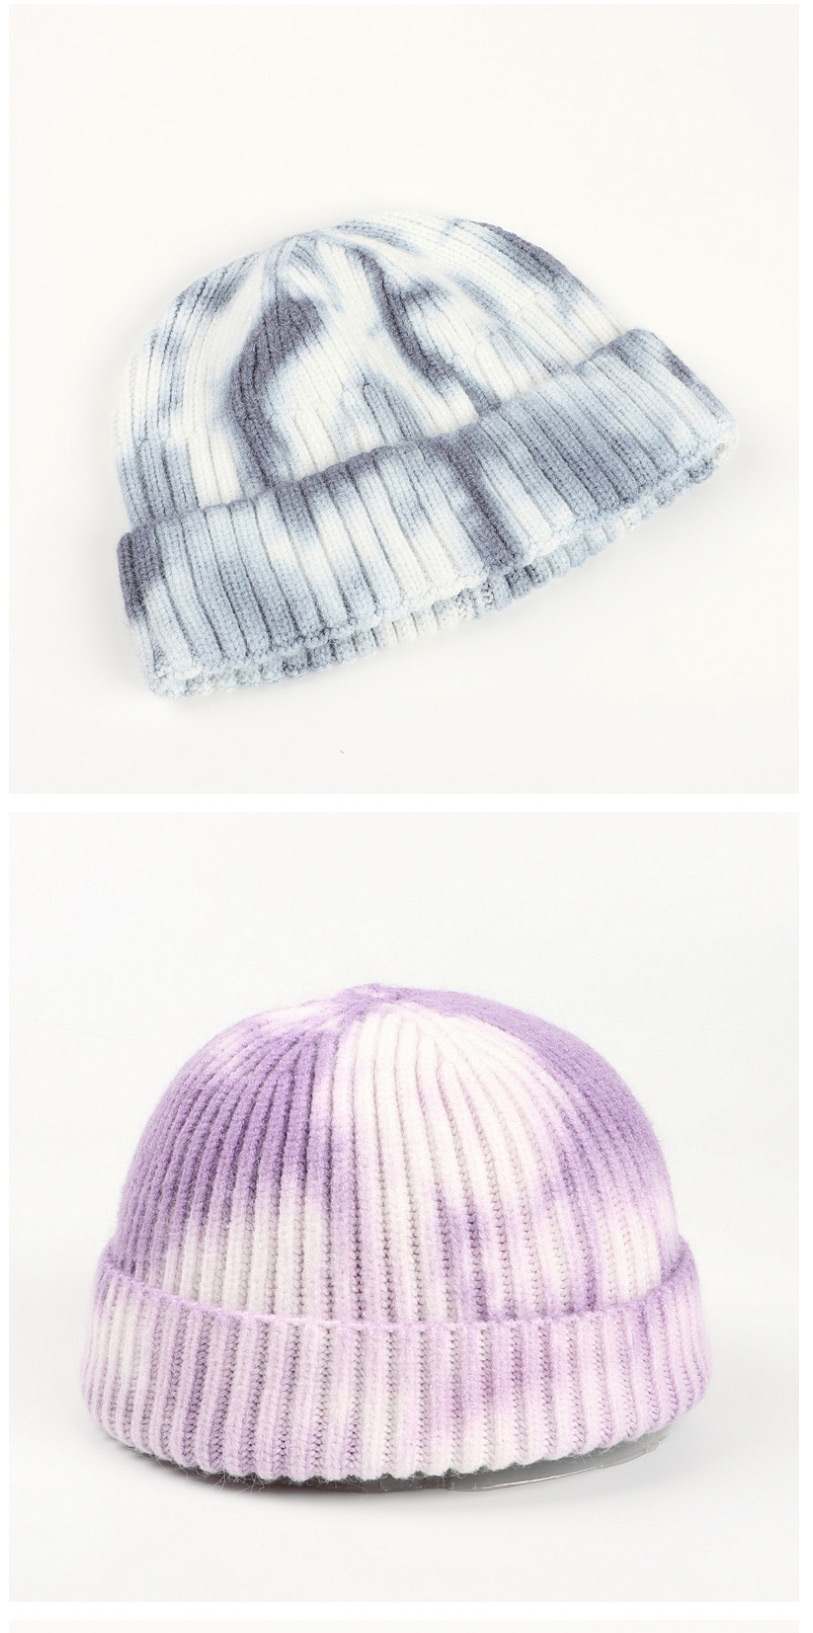 Fashion Purple Tie-dyed Mohair Curled Knitted Beanie Hat,Knitting Wool Hats